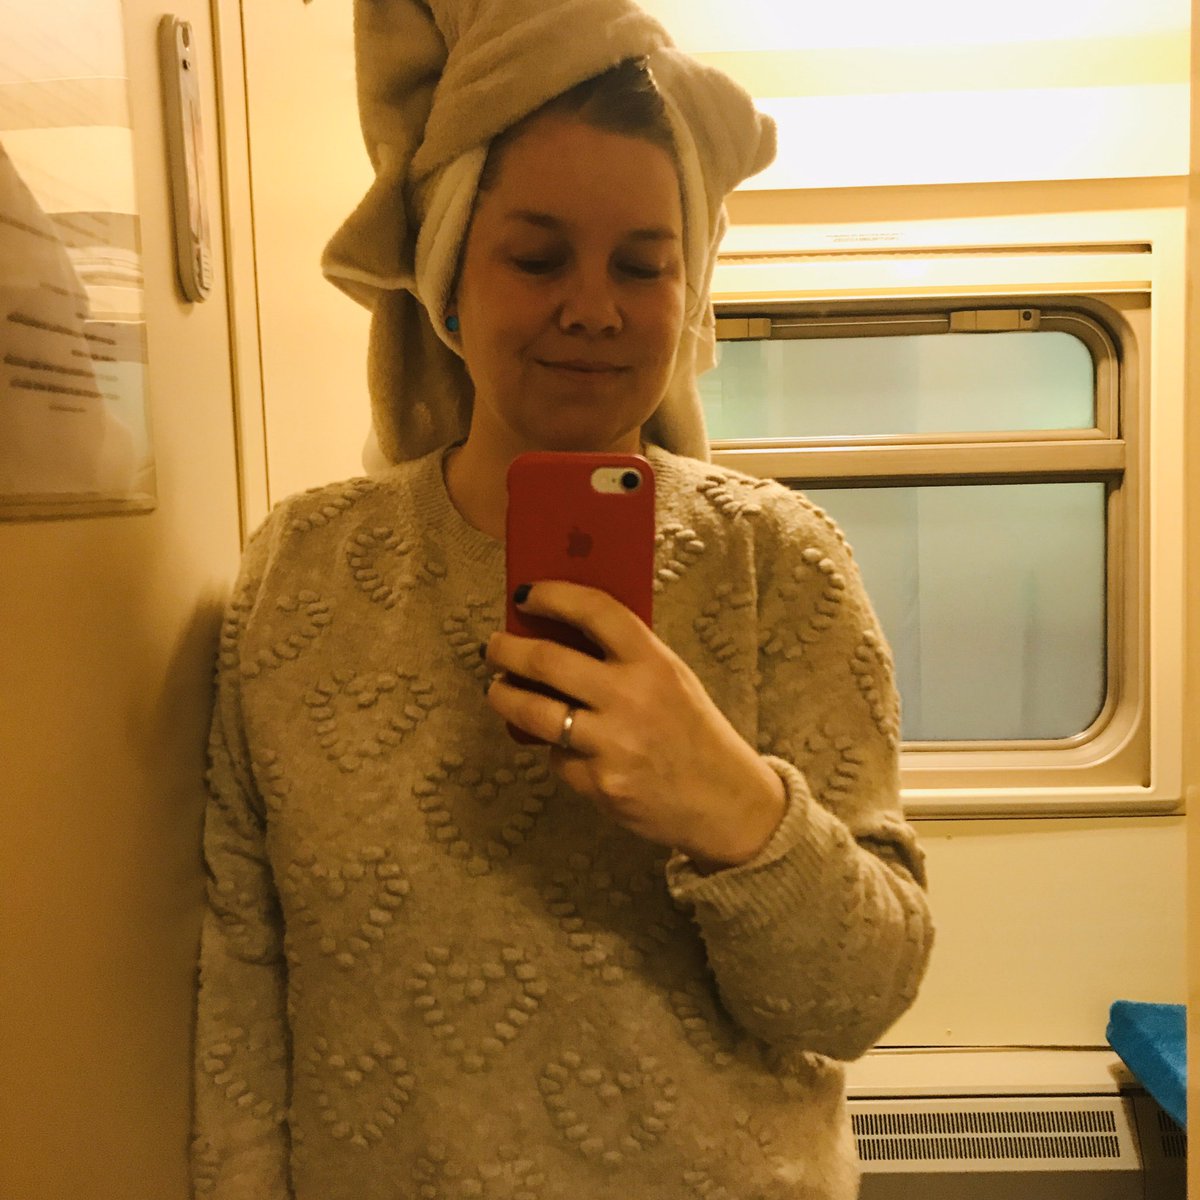 I had a shower somewhere between Perm and Yekaterinburg and it was freaking fabulous. It cost 150 rubles and it was properly hot and water pressure totally fine - I even washed and conditioned my hair. So nice.